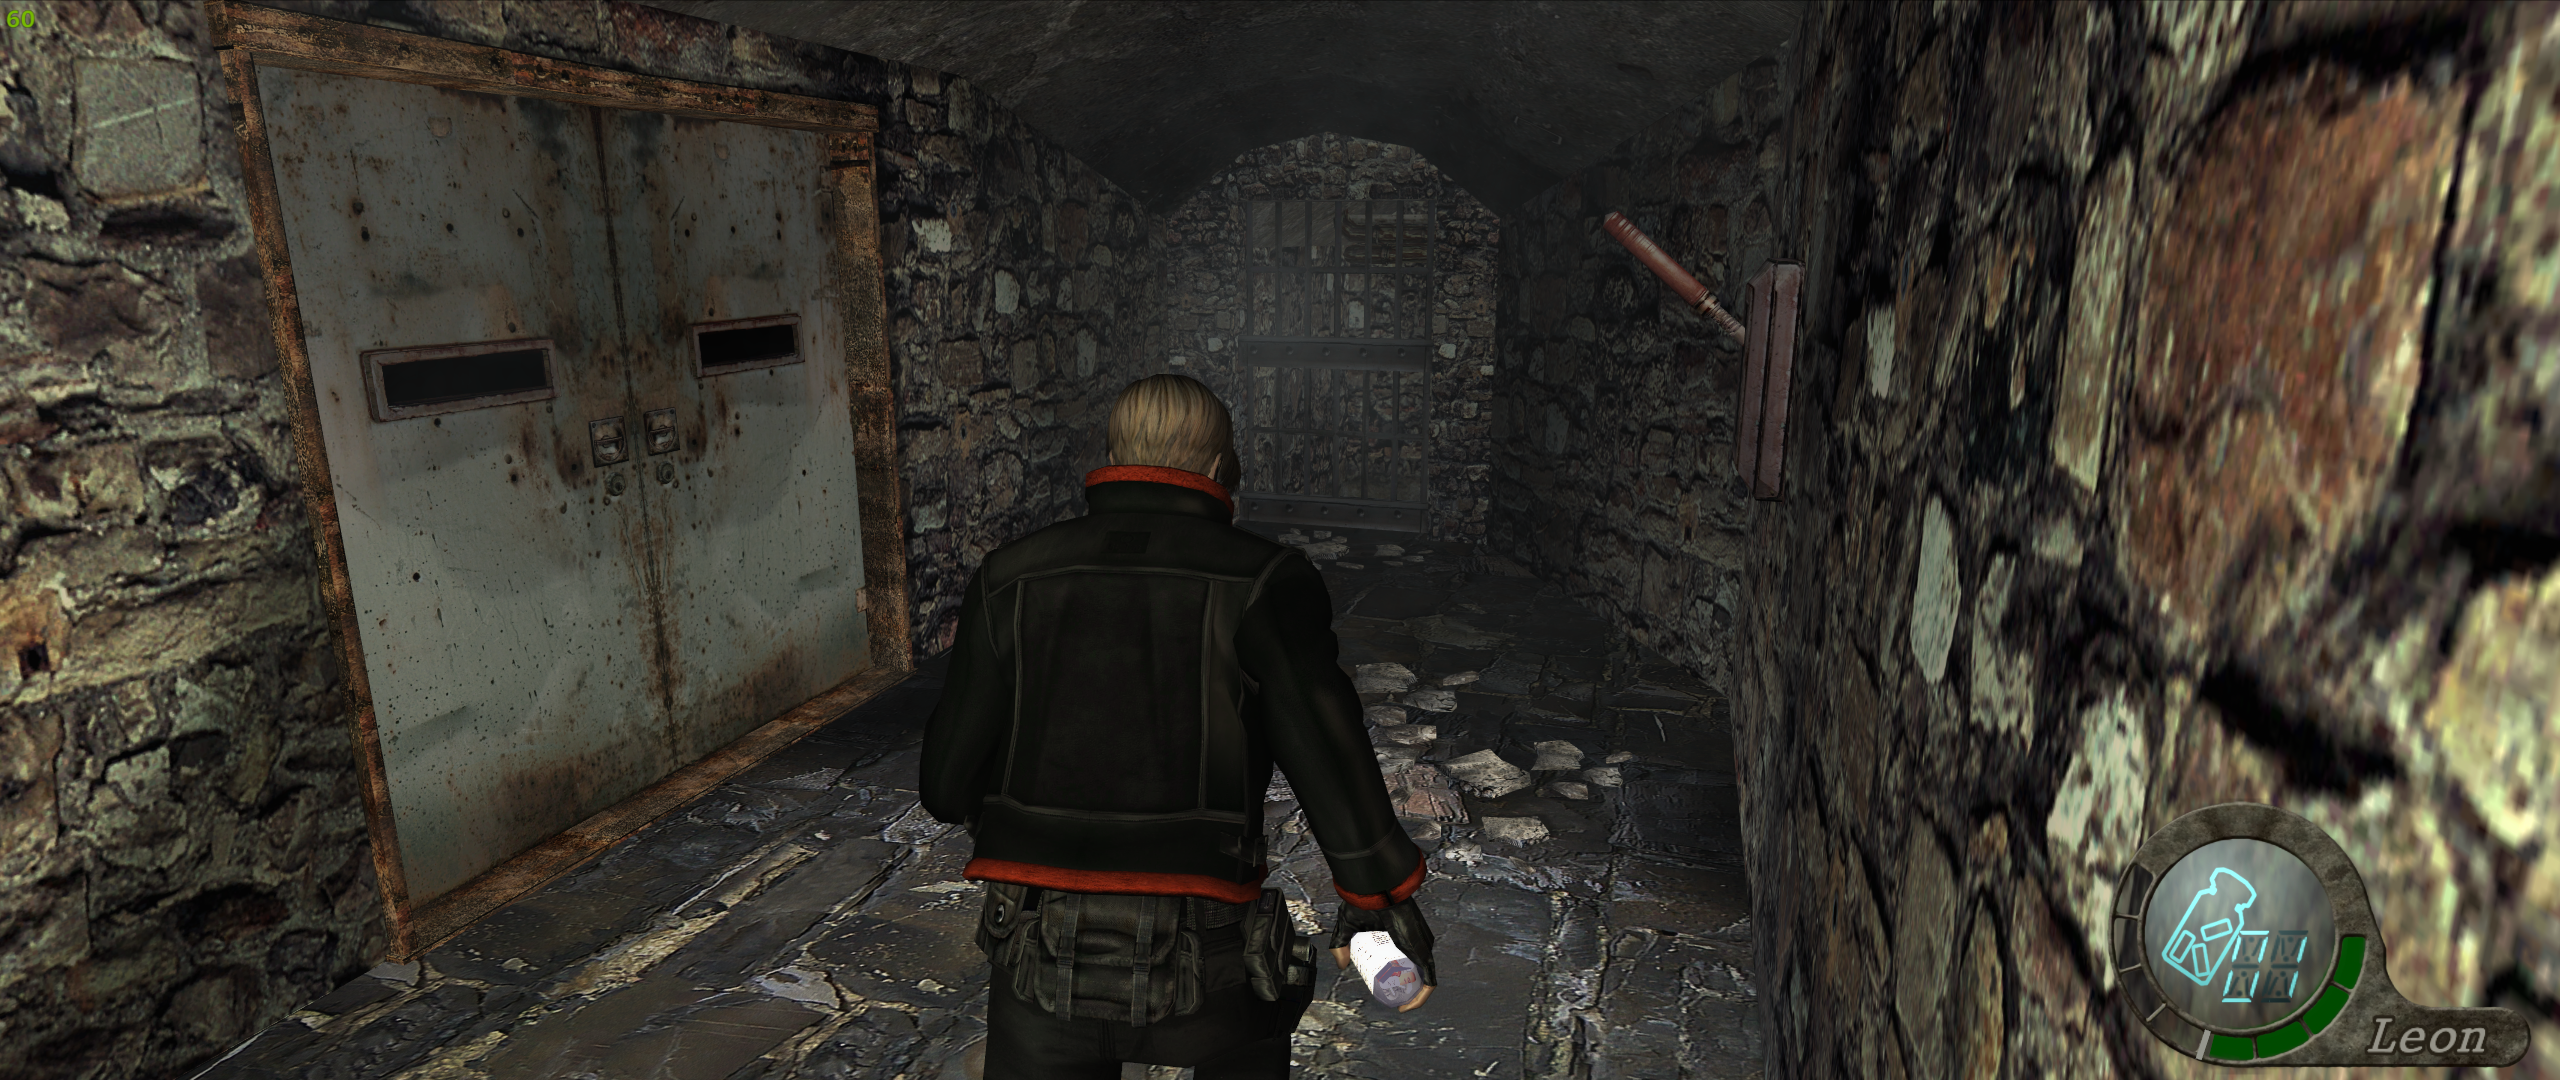 Resident Evil 4 Remake achievements are leaked on Reddit